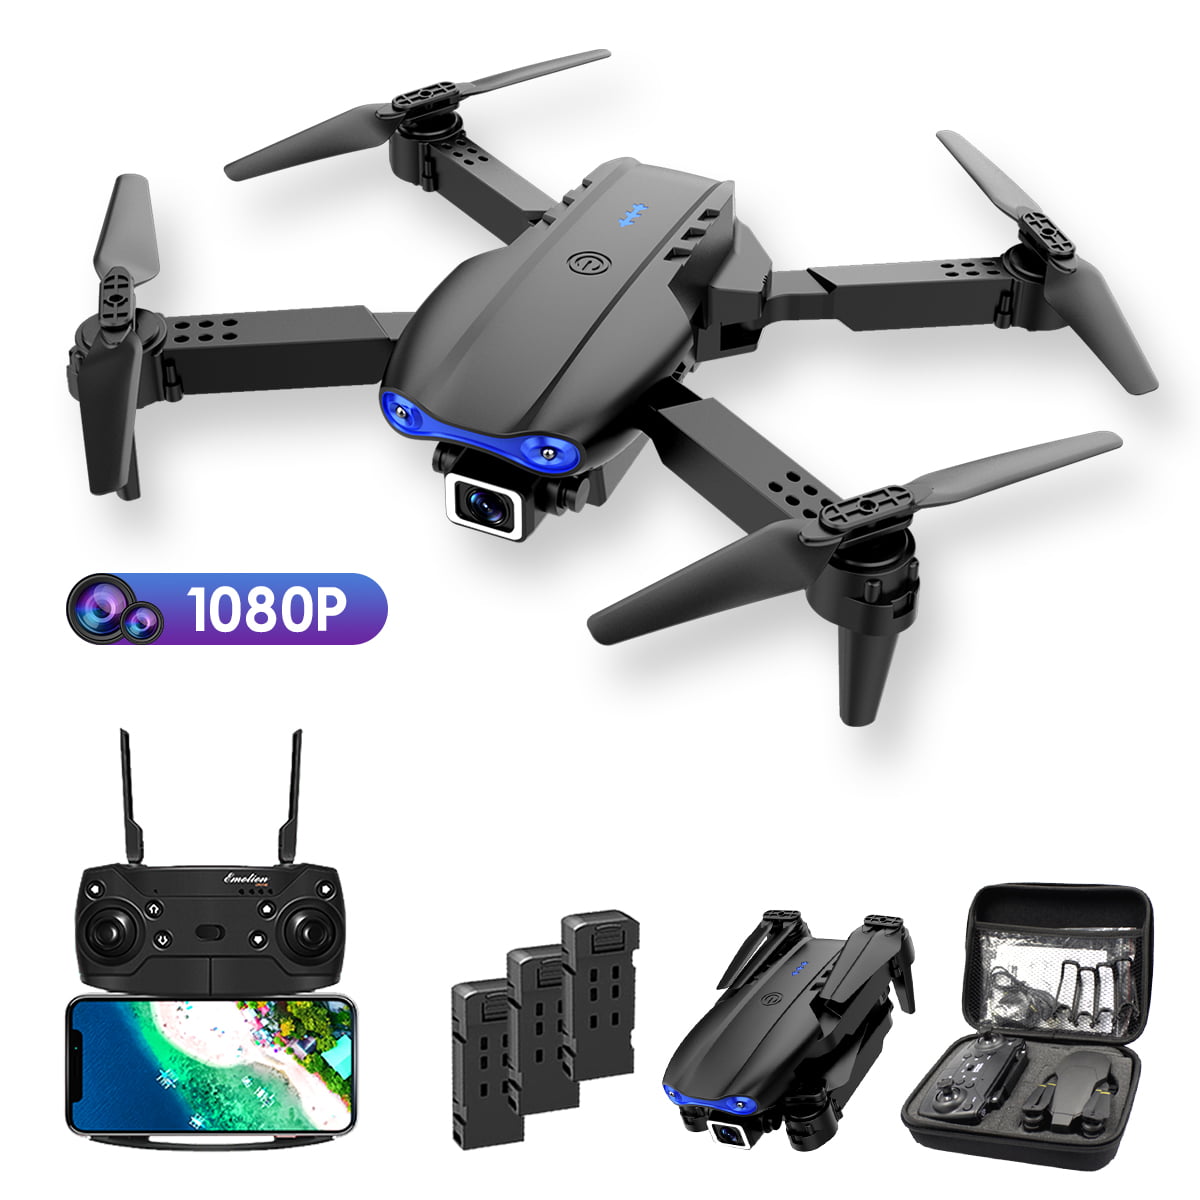 Details about   2021 Mini Rc Drone WiFi fpv Foldable Drone With 4k HD Camera Quadcopter Aircraft 